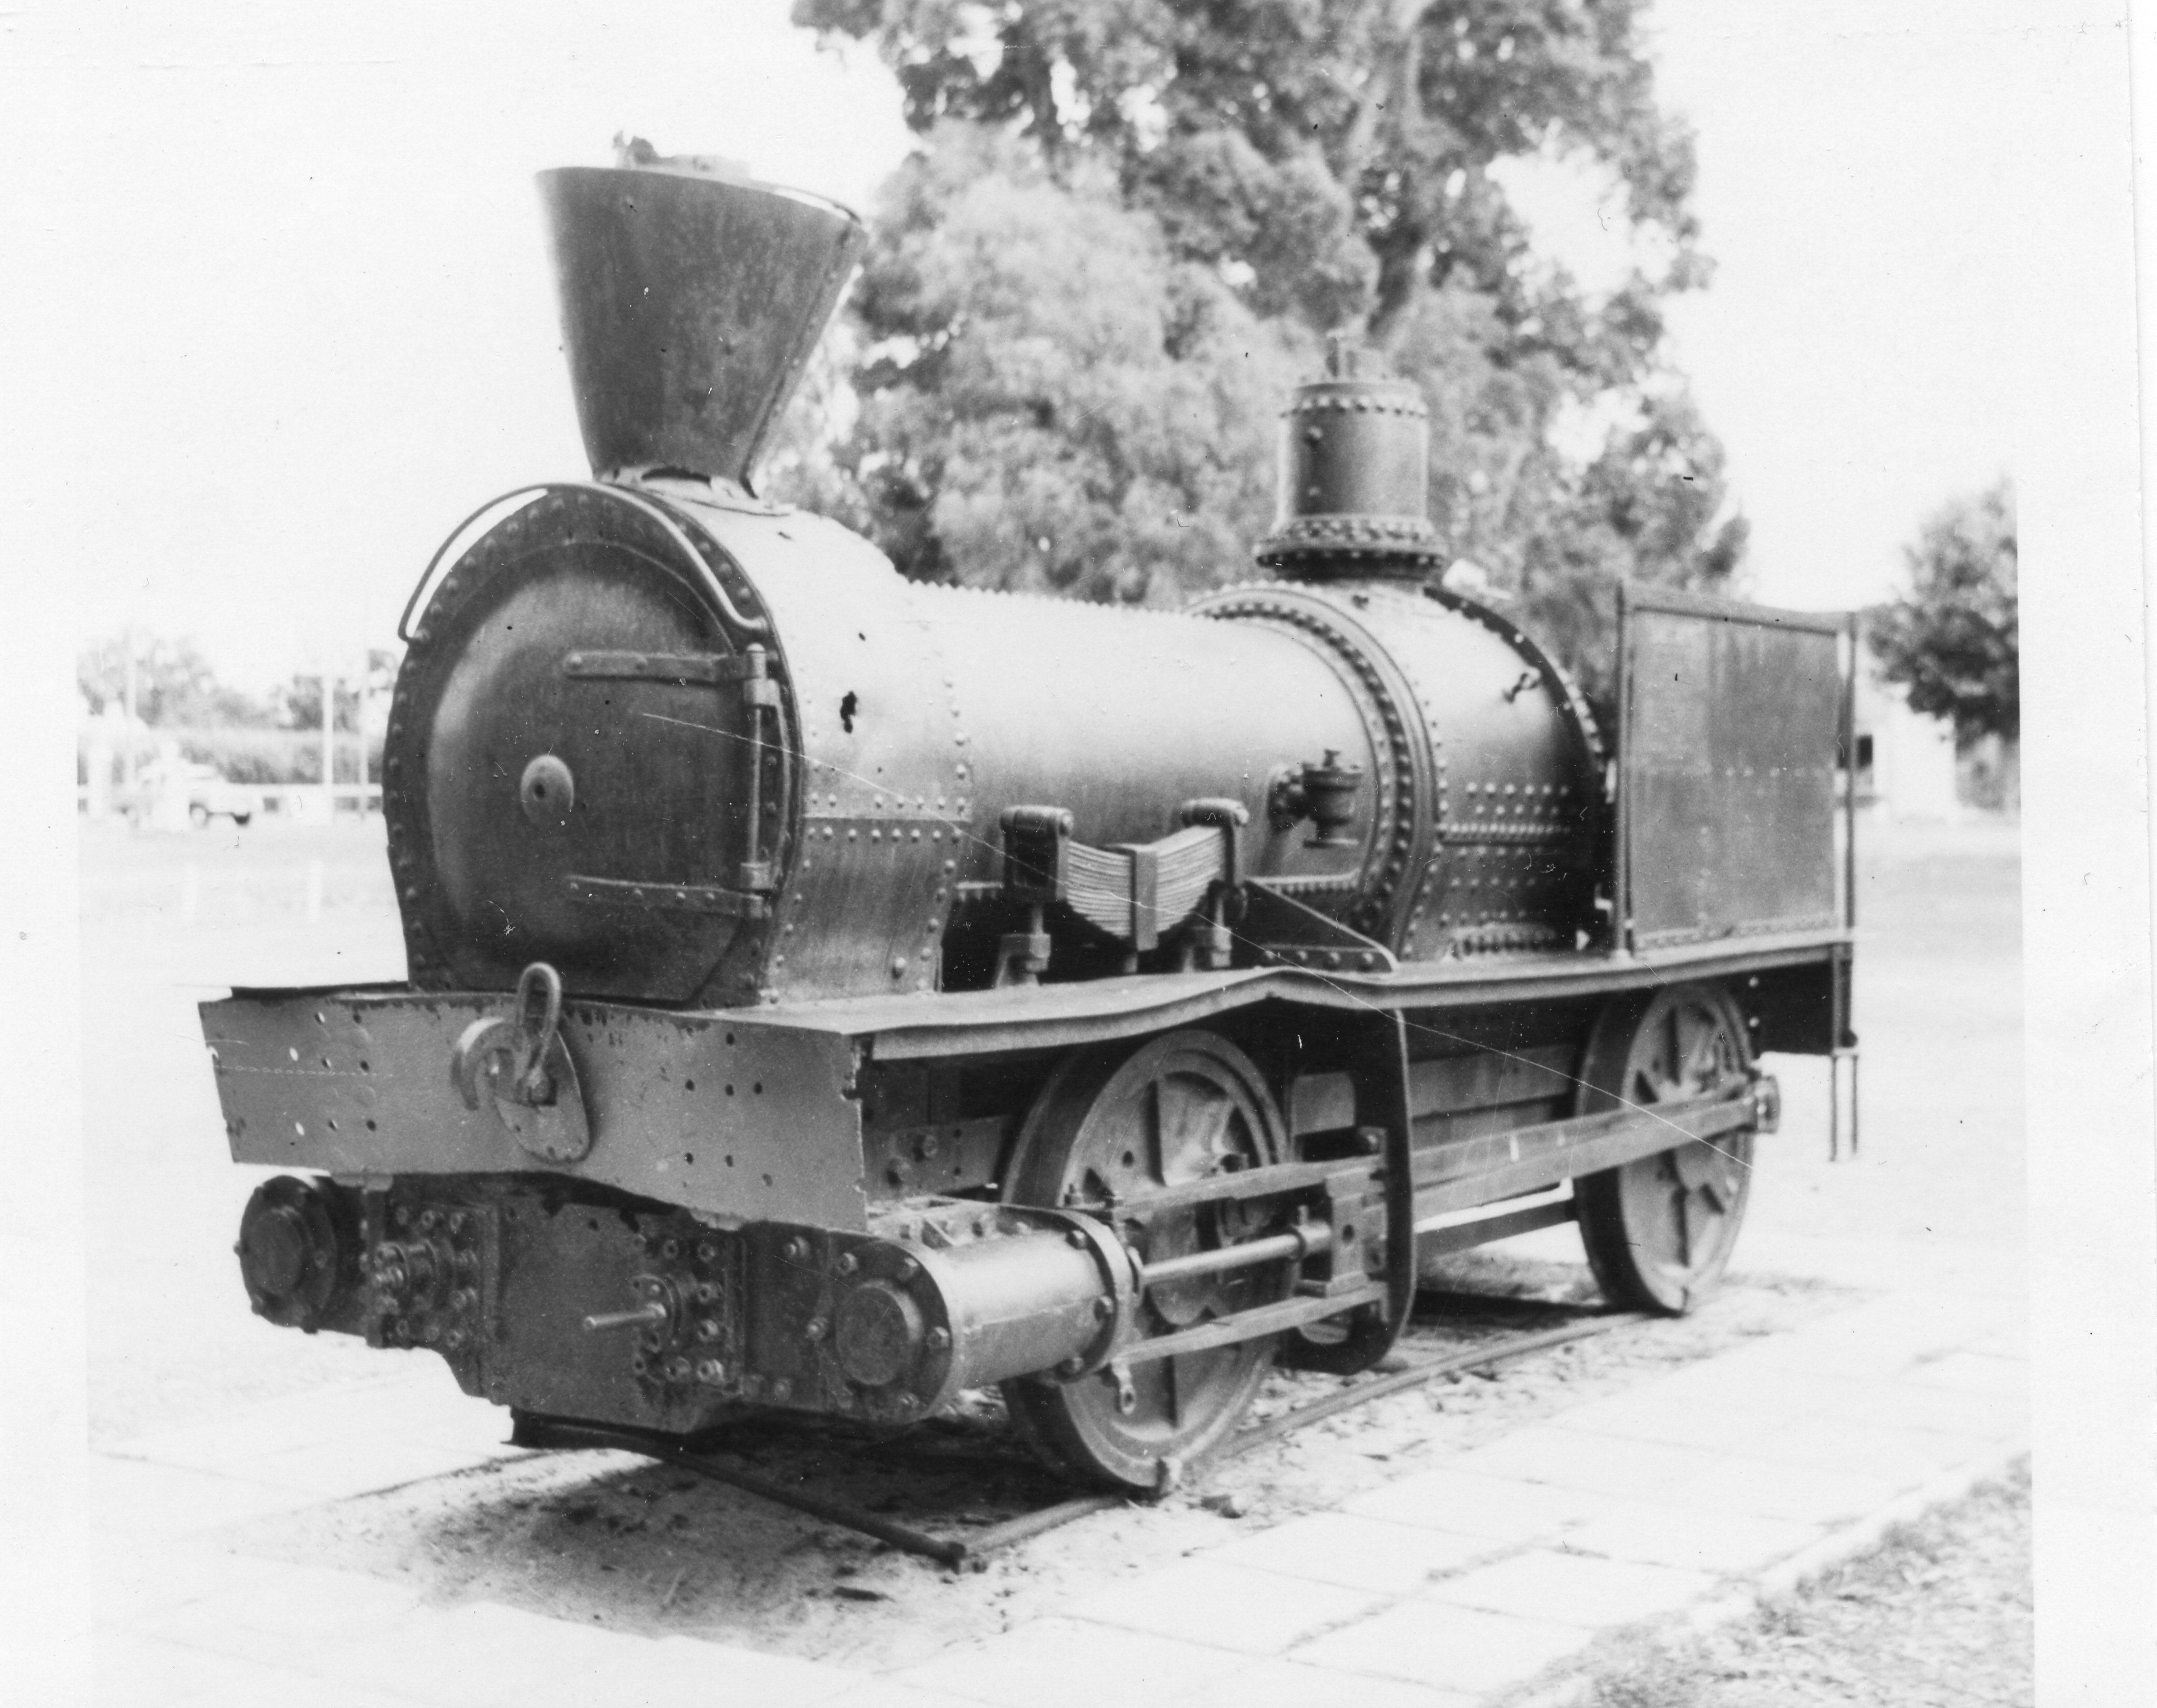 Image: Ballaarat steam engine, Photographer D. Sharp, date unknown, Courtesy of the City of Busselton, Collection of Rail Heritage WA